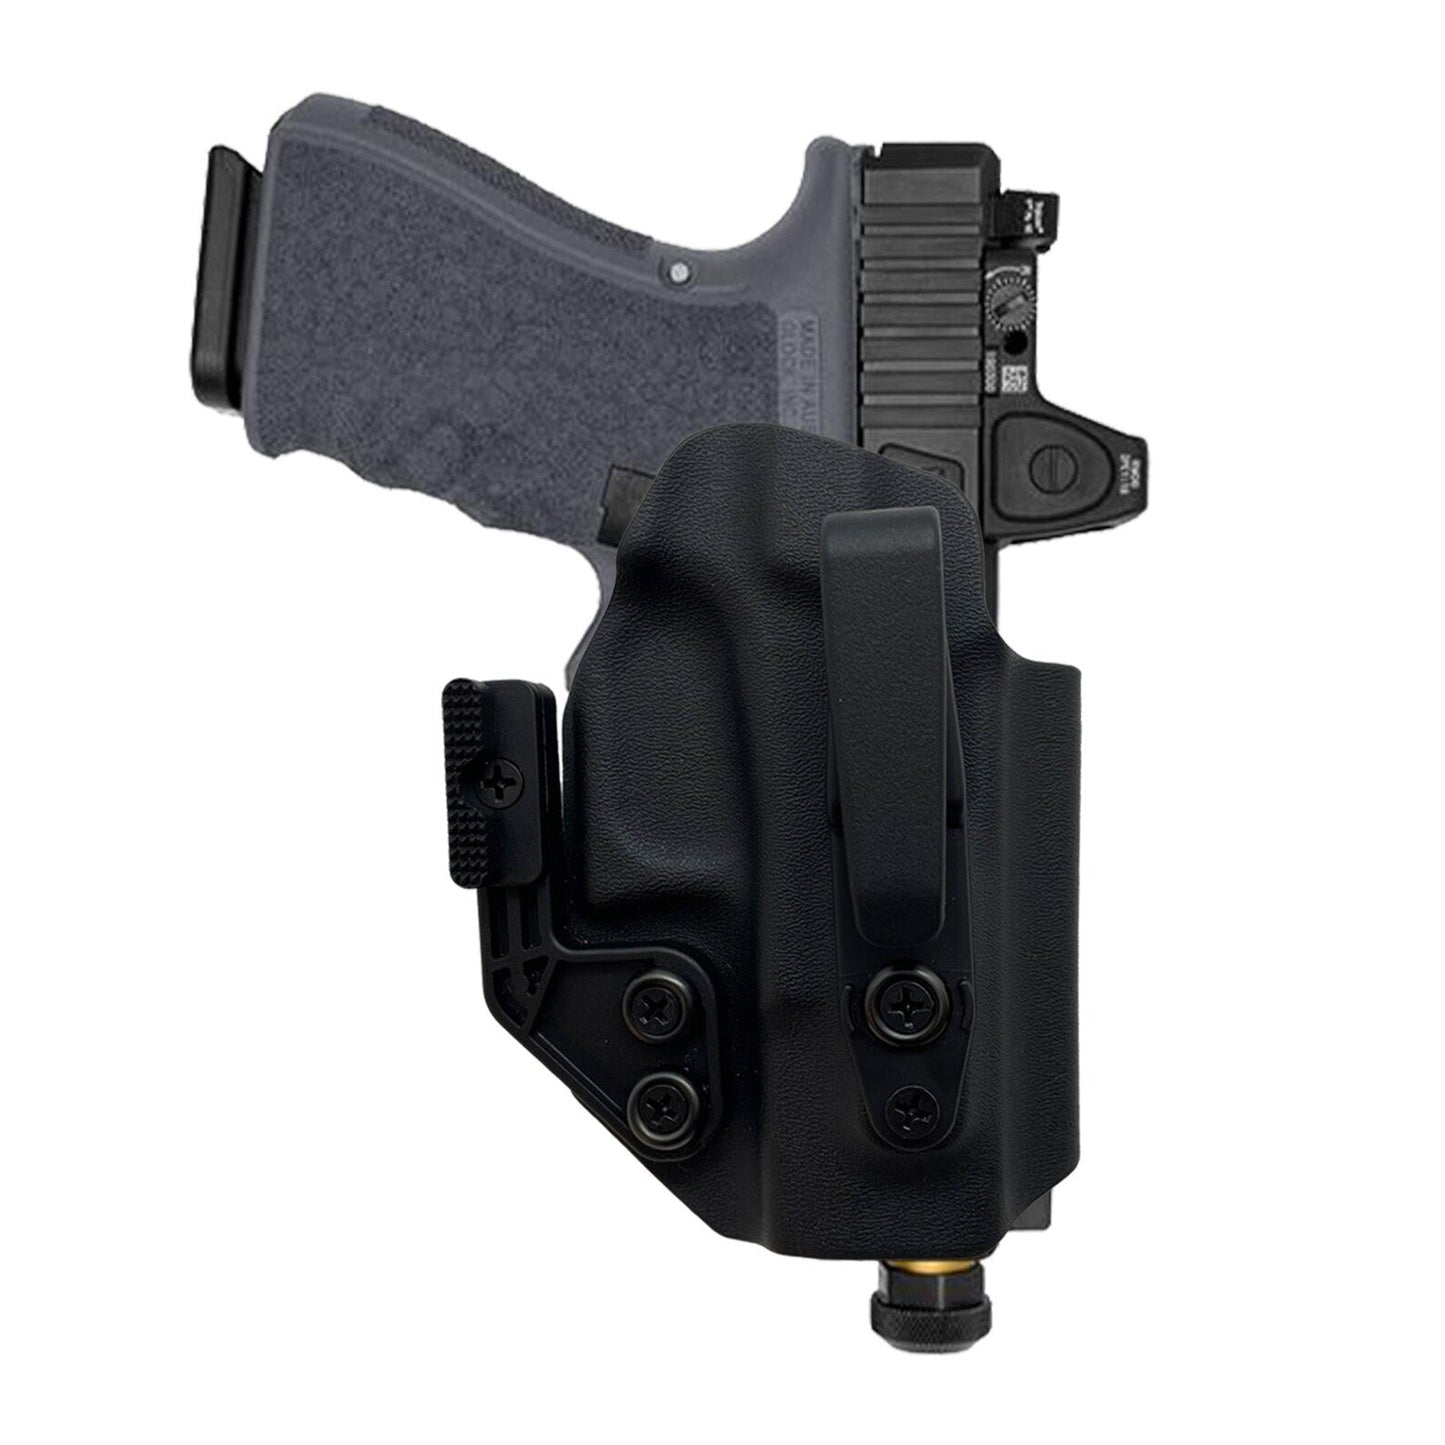 SIG P365XL With TLR7-SUB Light (Micro Tuckable Holster) IWB (Inside The Waistband Holster)